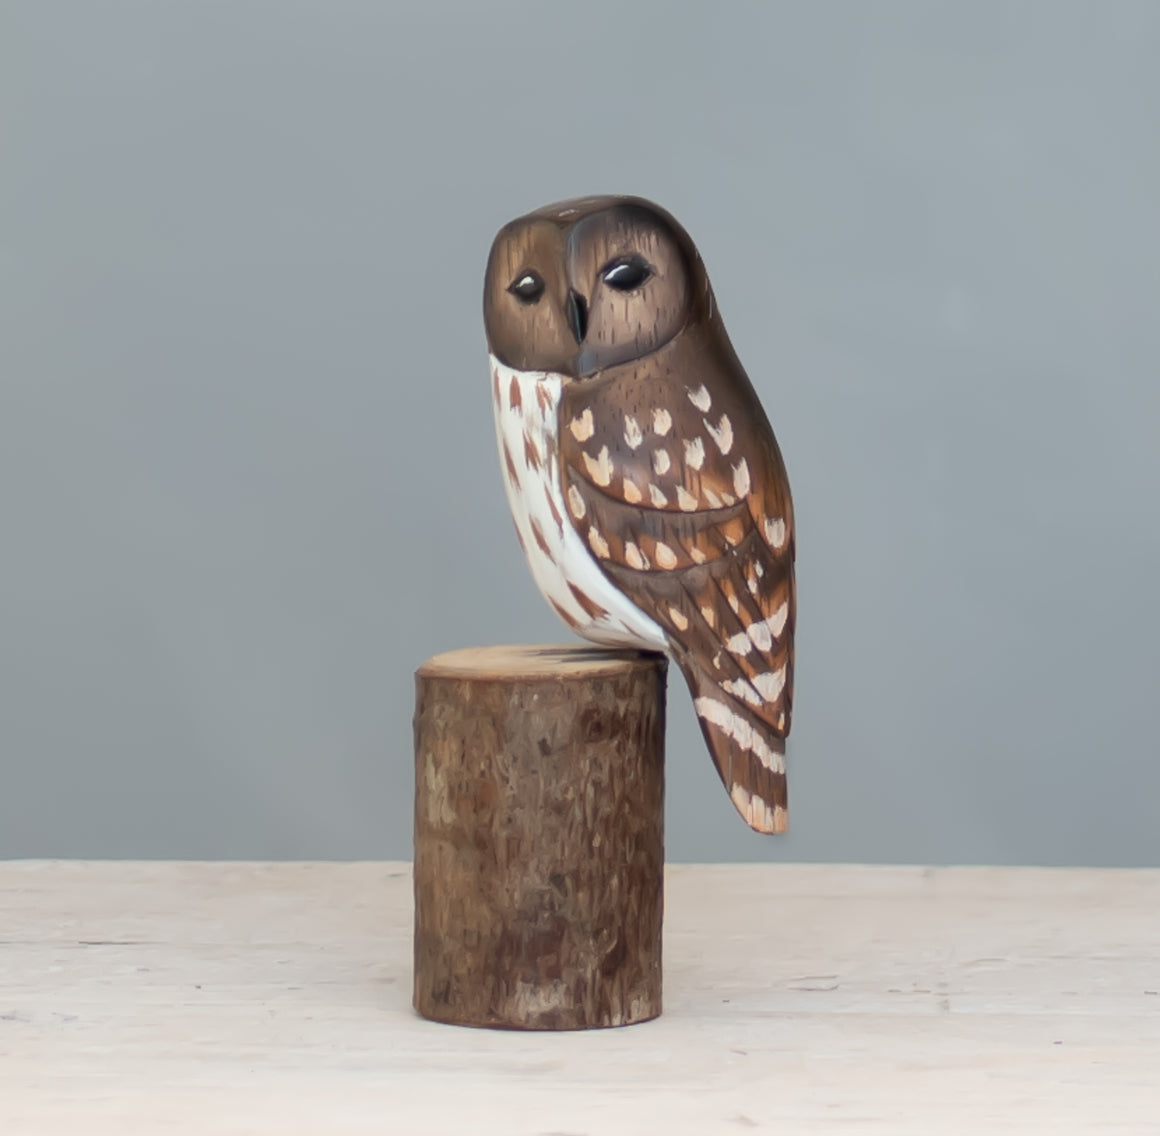 Barred Owl  - Mini - 5.5"H - Hand Carved | Wooden Bird